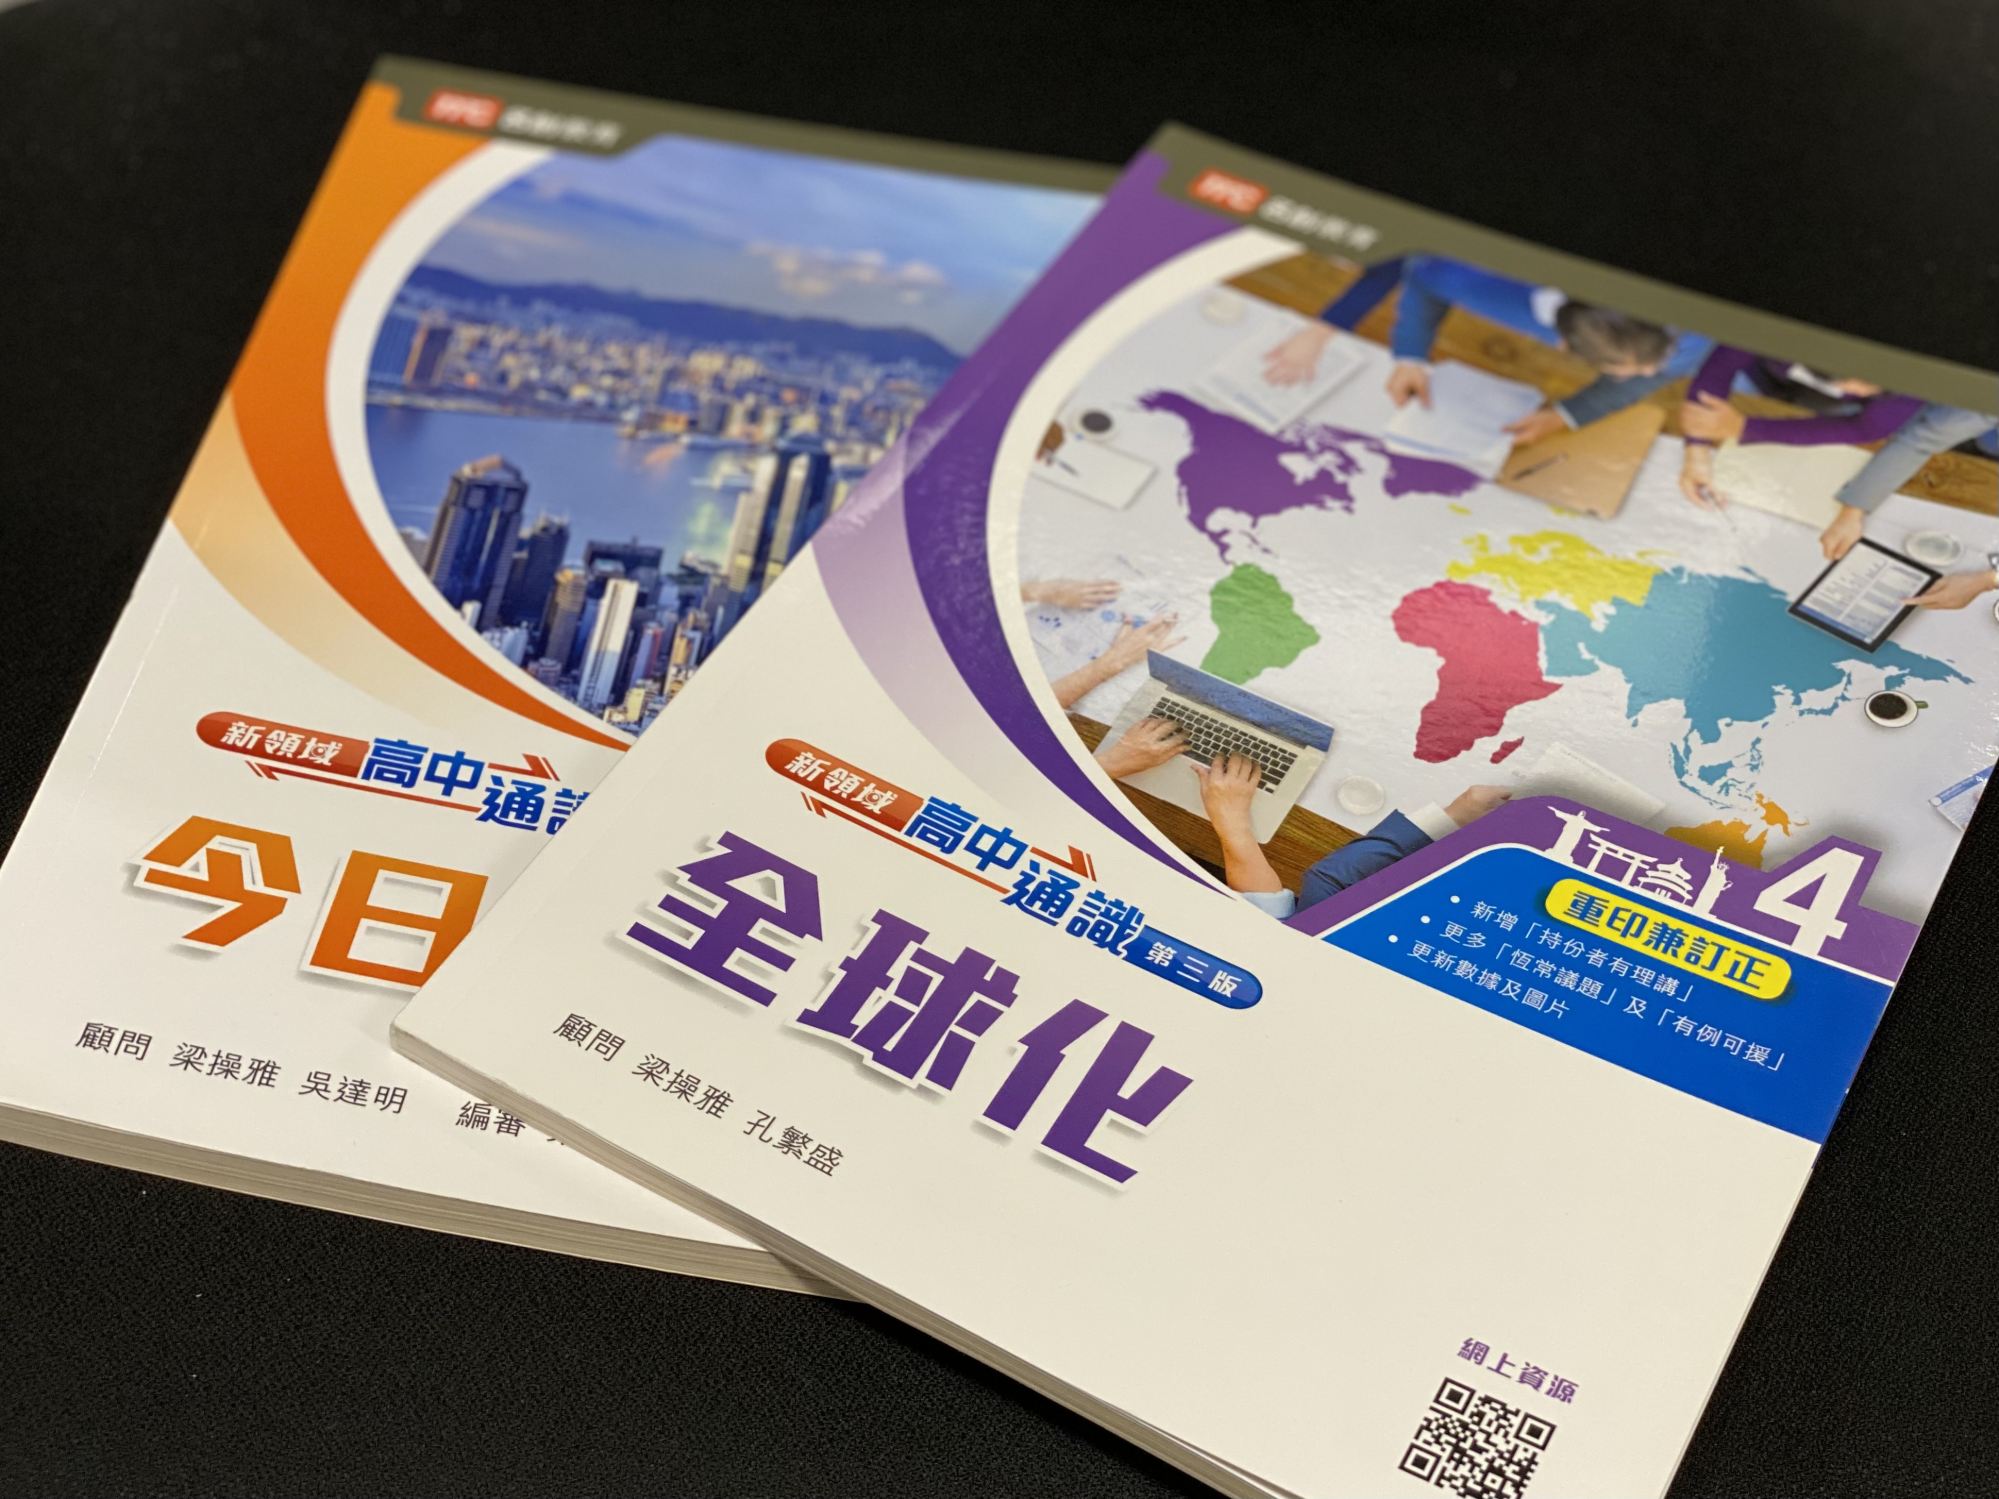 The 2018 edition of textbooks produced by local publisher Marshall Cavendish Education for liberal studies. Photo: Chan Ho-Him